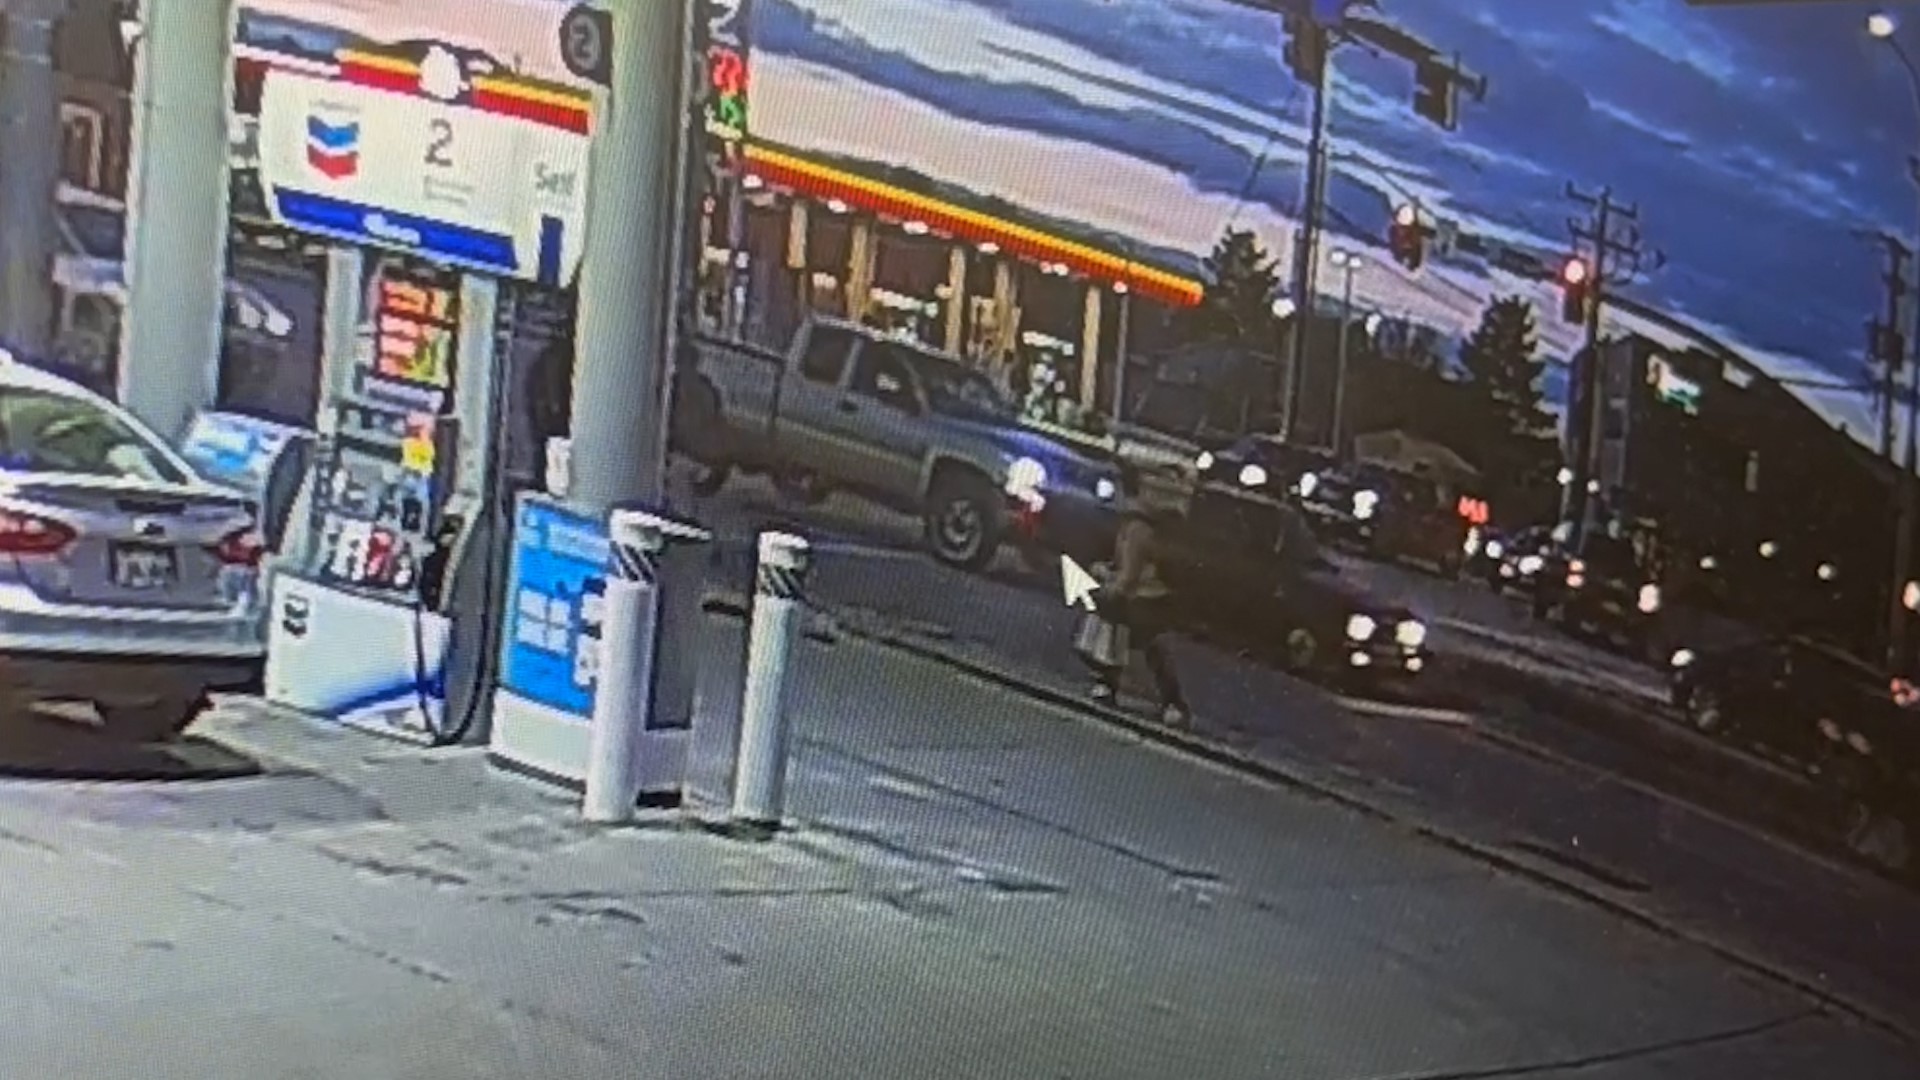 Security footage of the two cars colliding into each other, just before gunfire was heard...